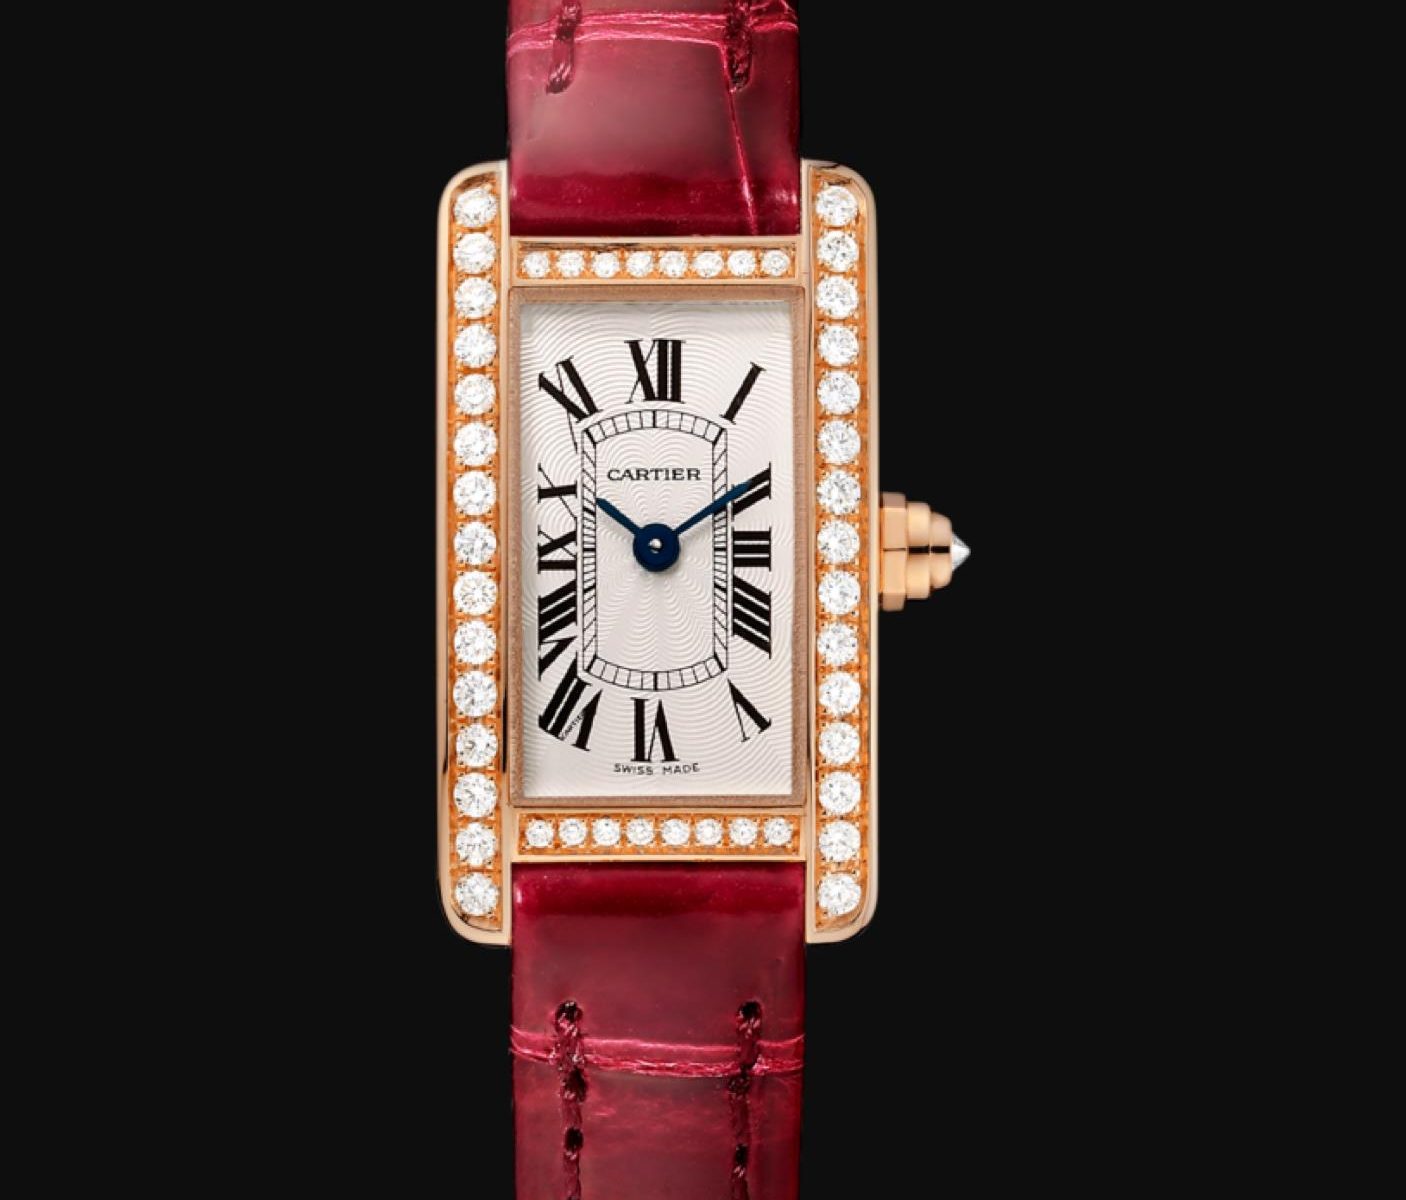 The 18k rose gold fake watch is decorated with diamonds.